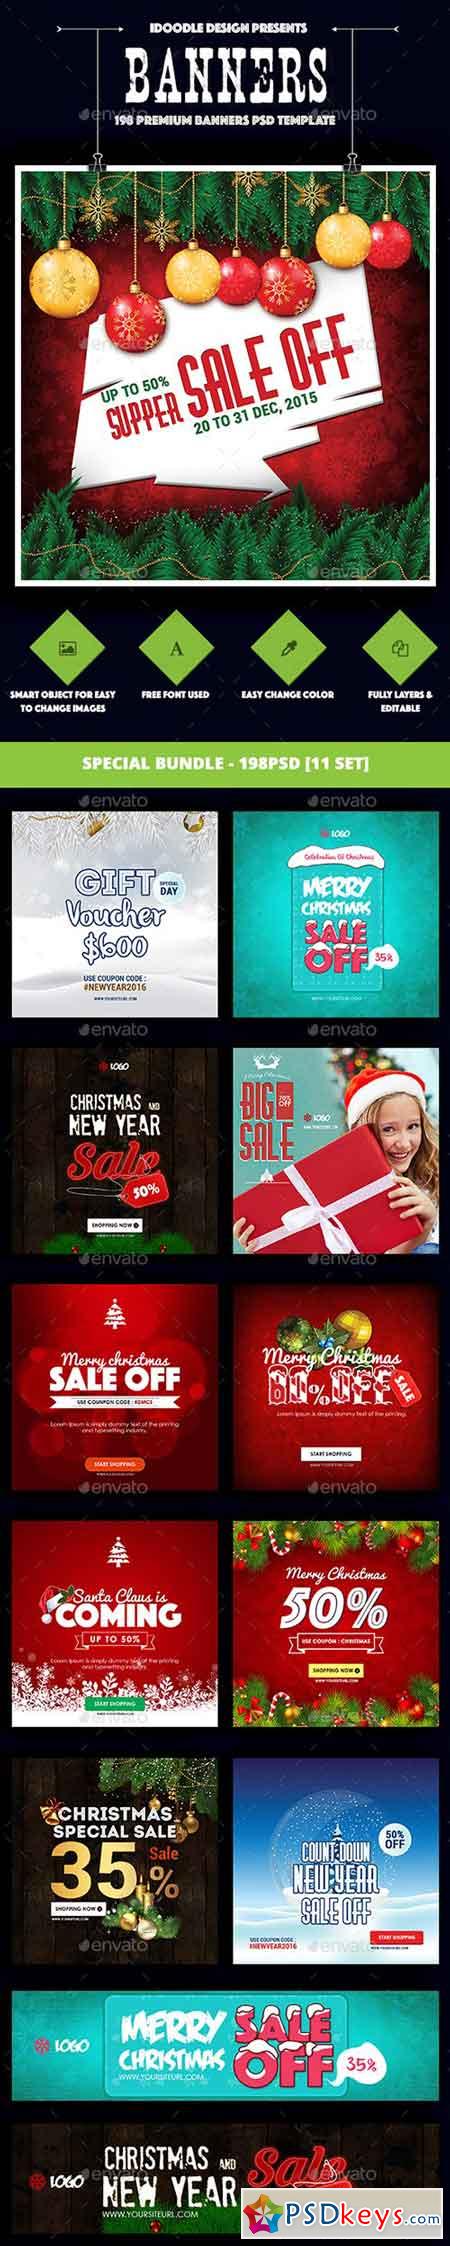 [Special Bundle] Christmas Banners Ads - 198PSD [11 Set] 19130437